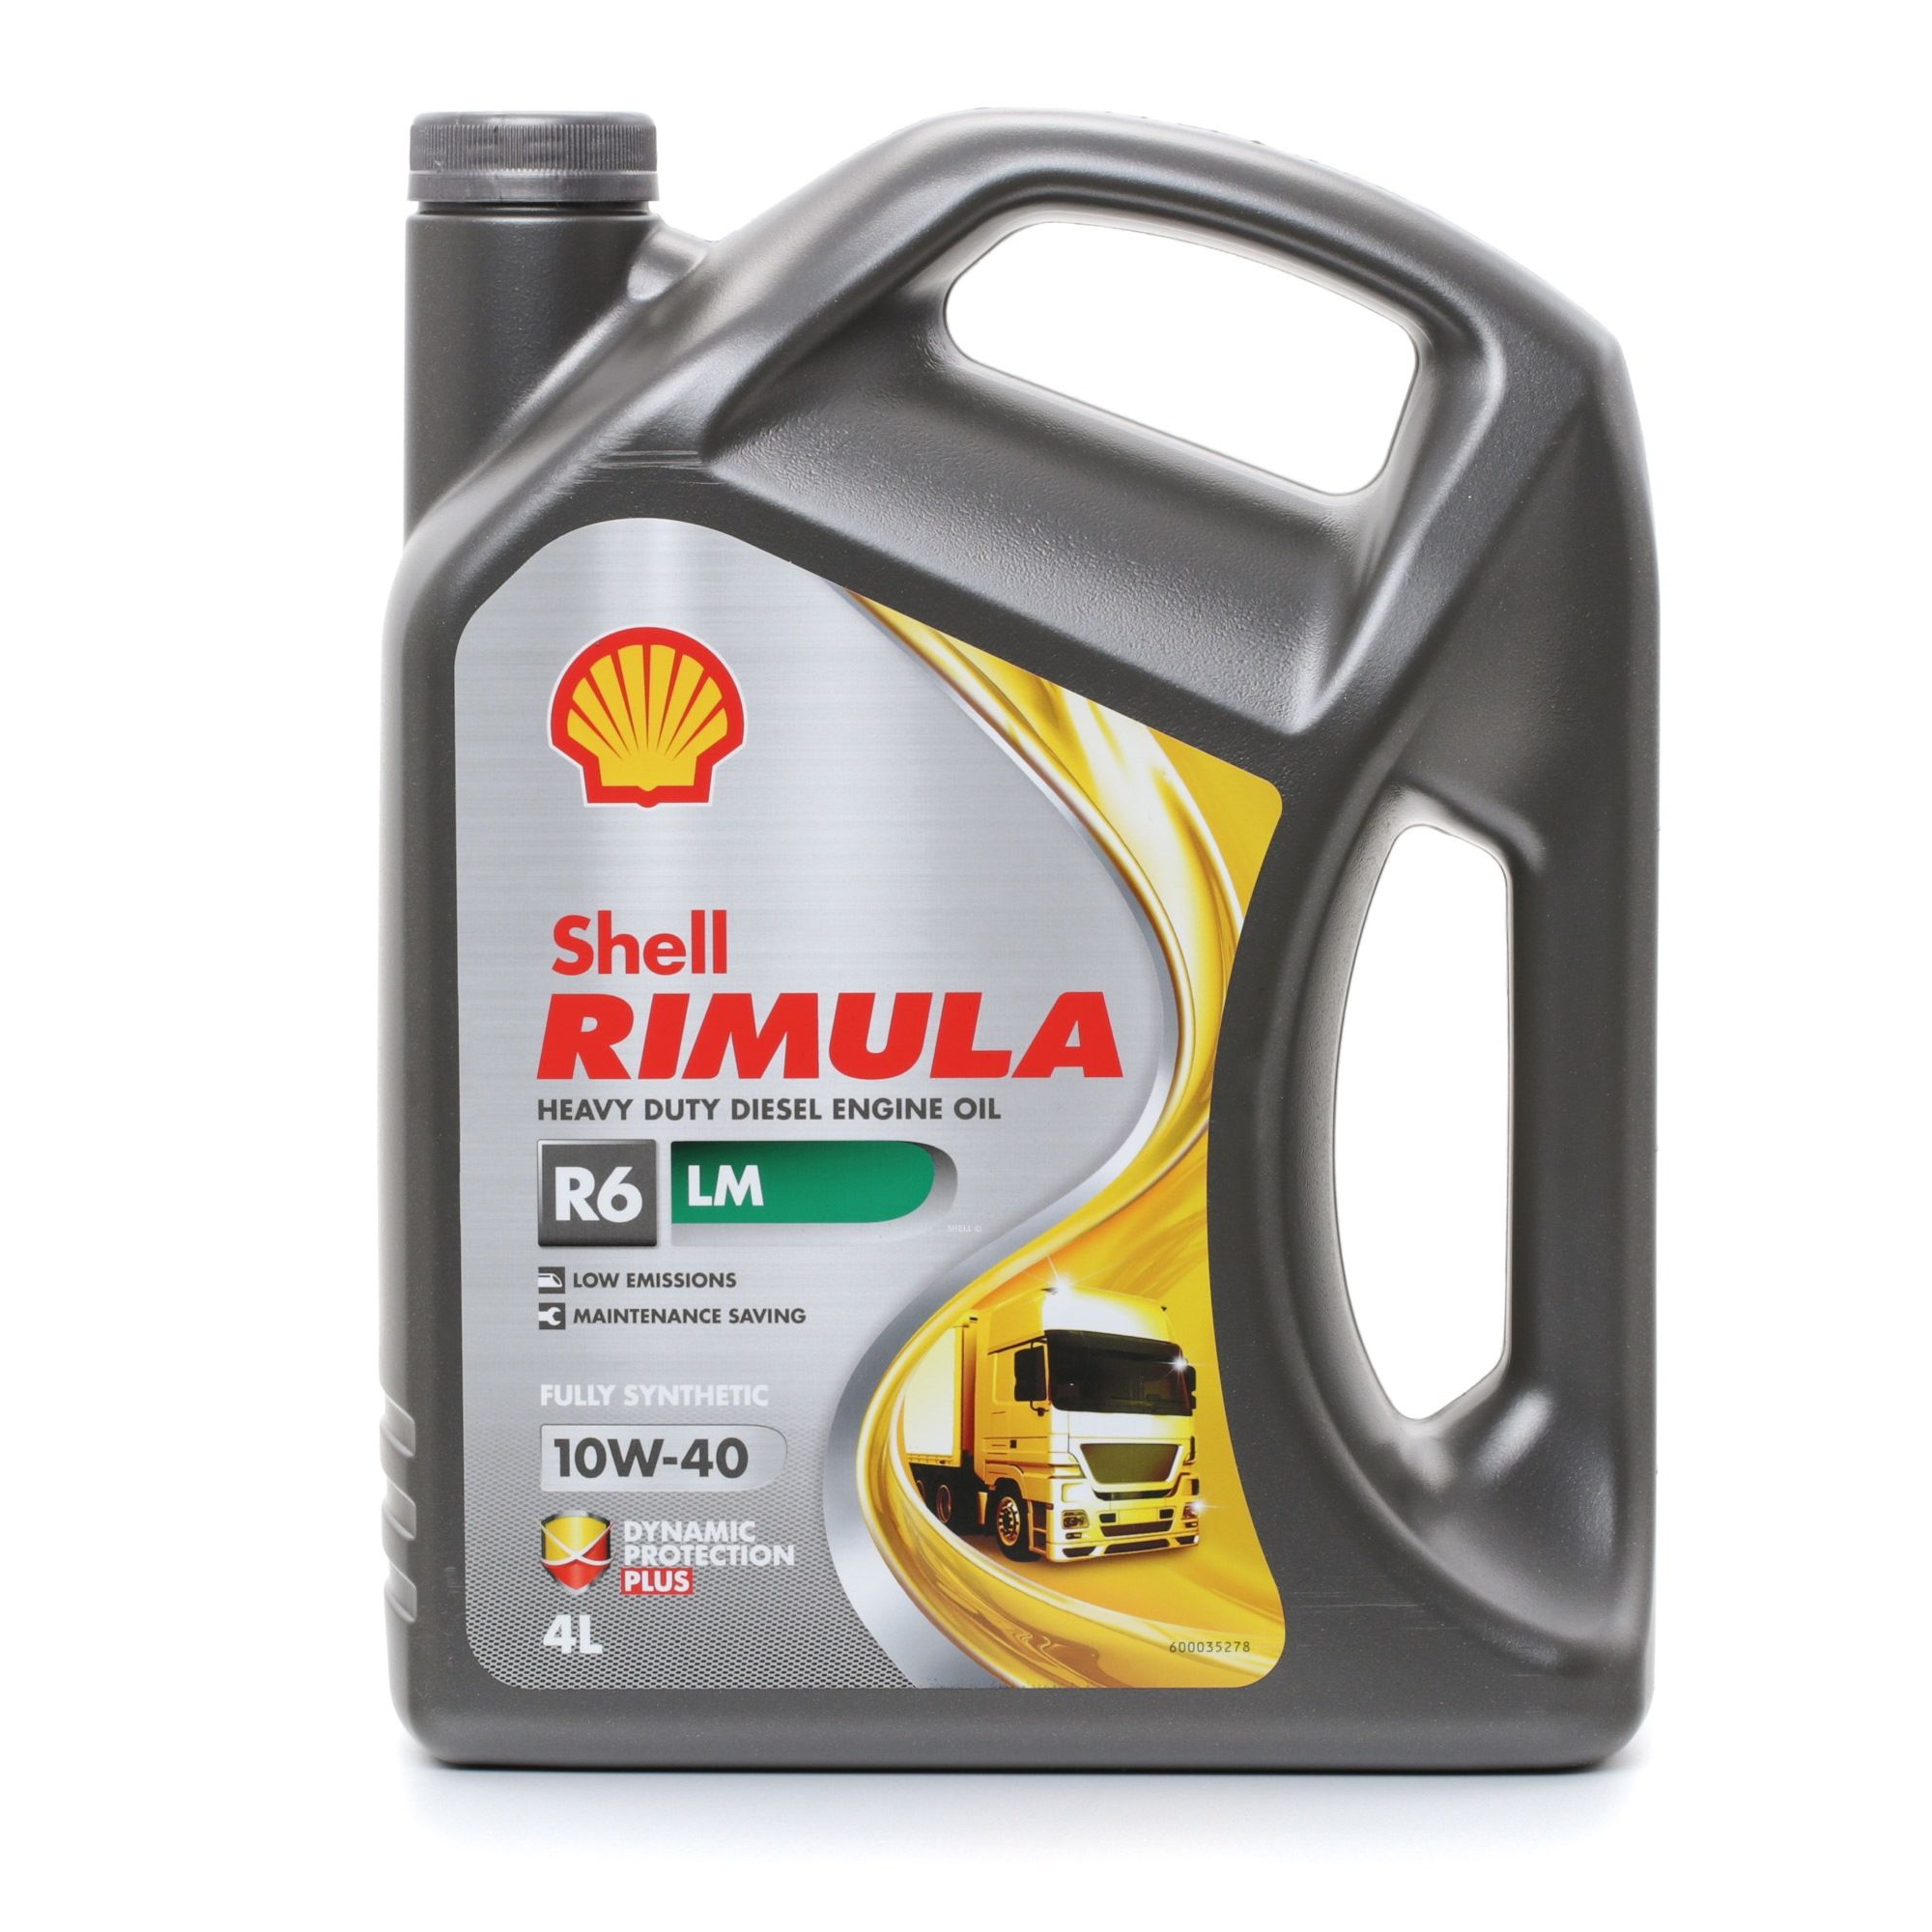 SHELL 550044889 Engine oil cheap in online store